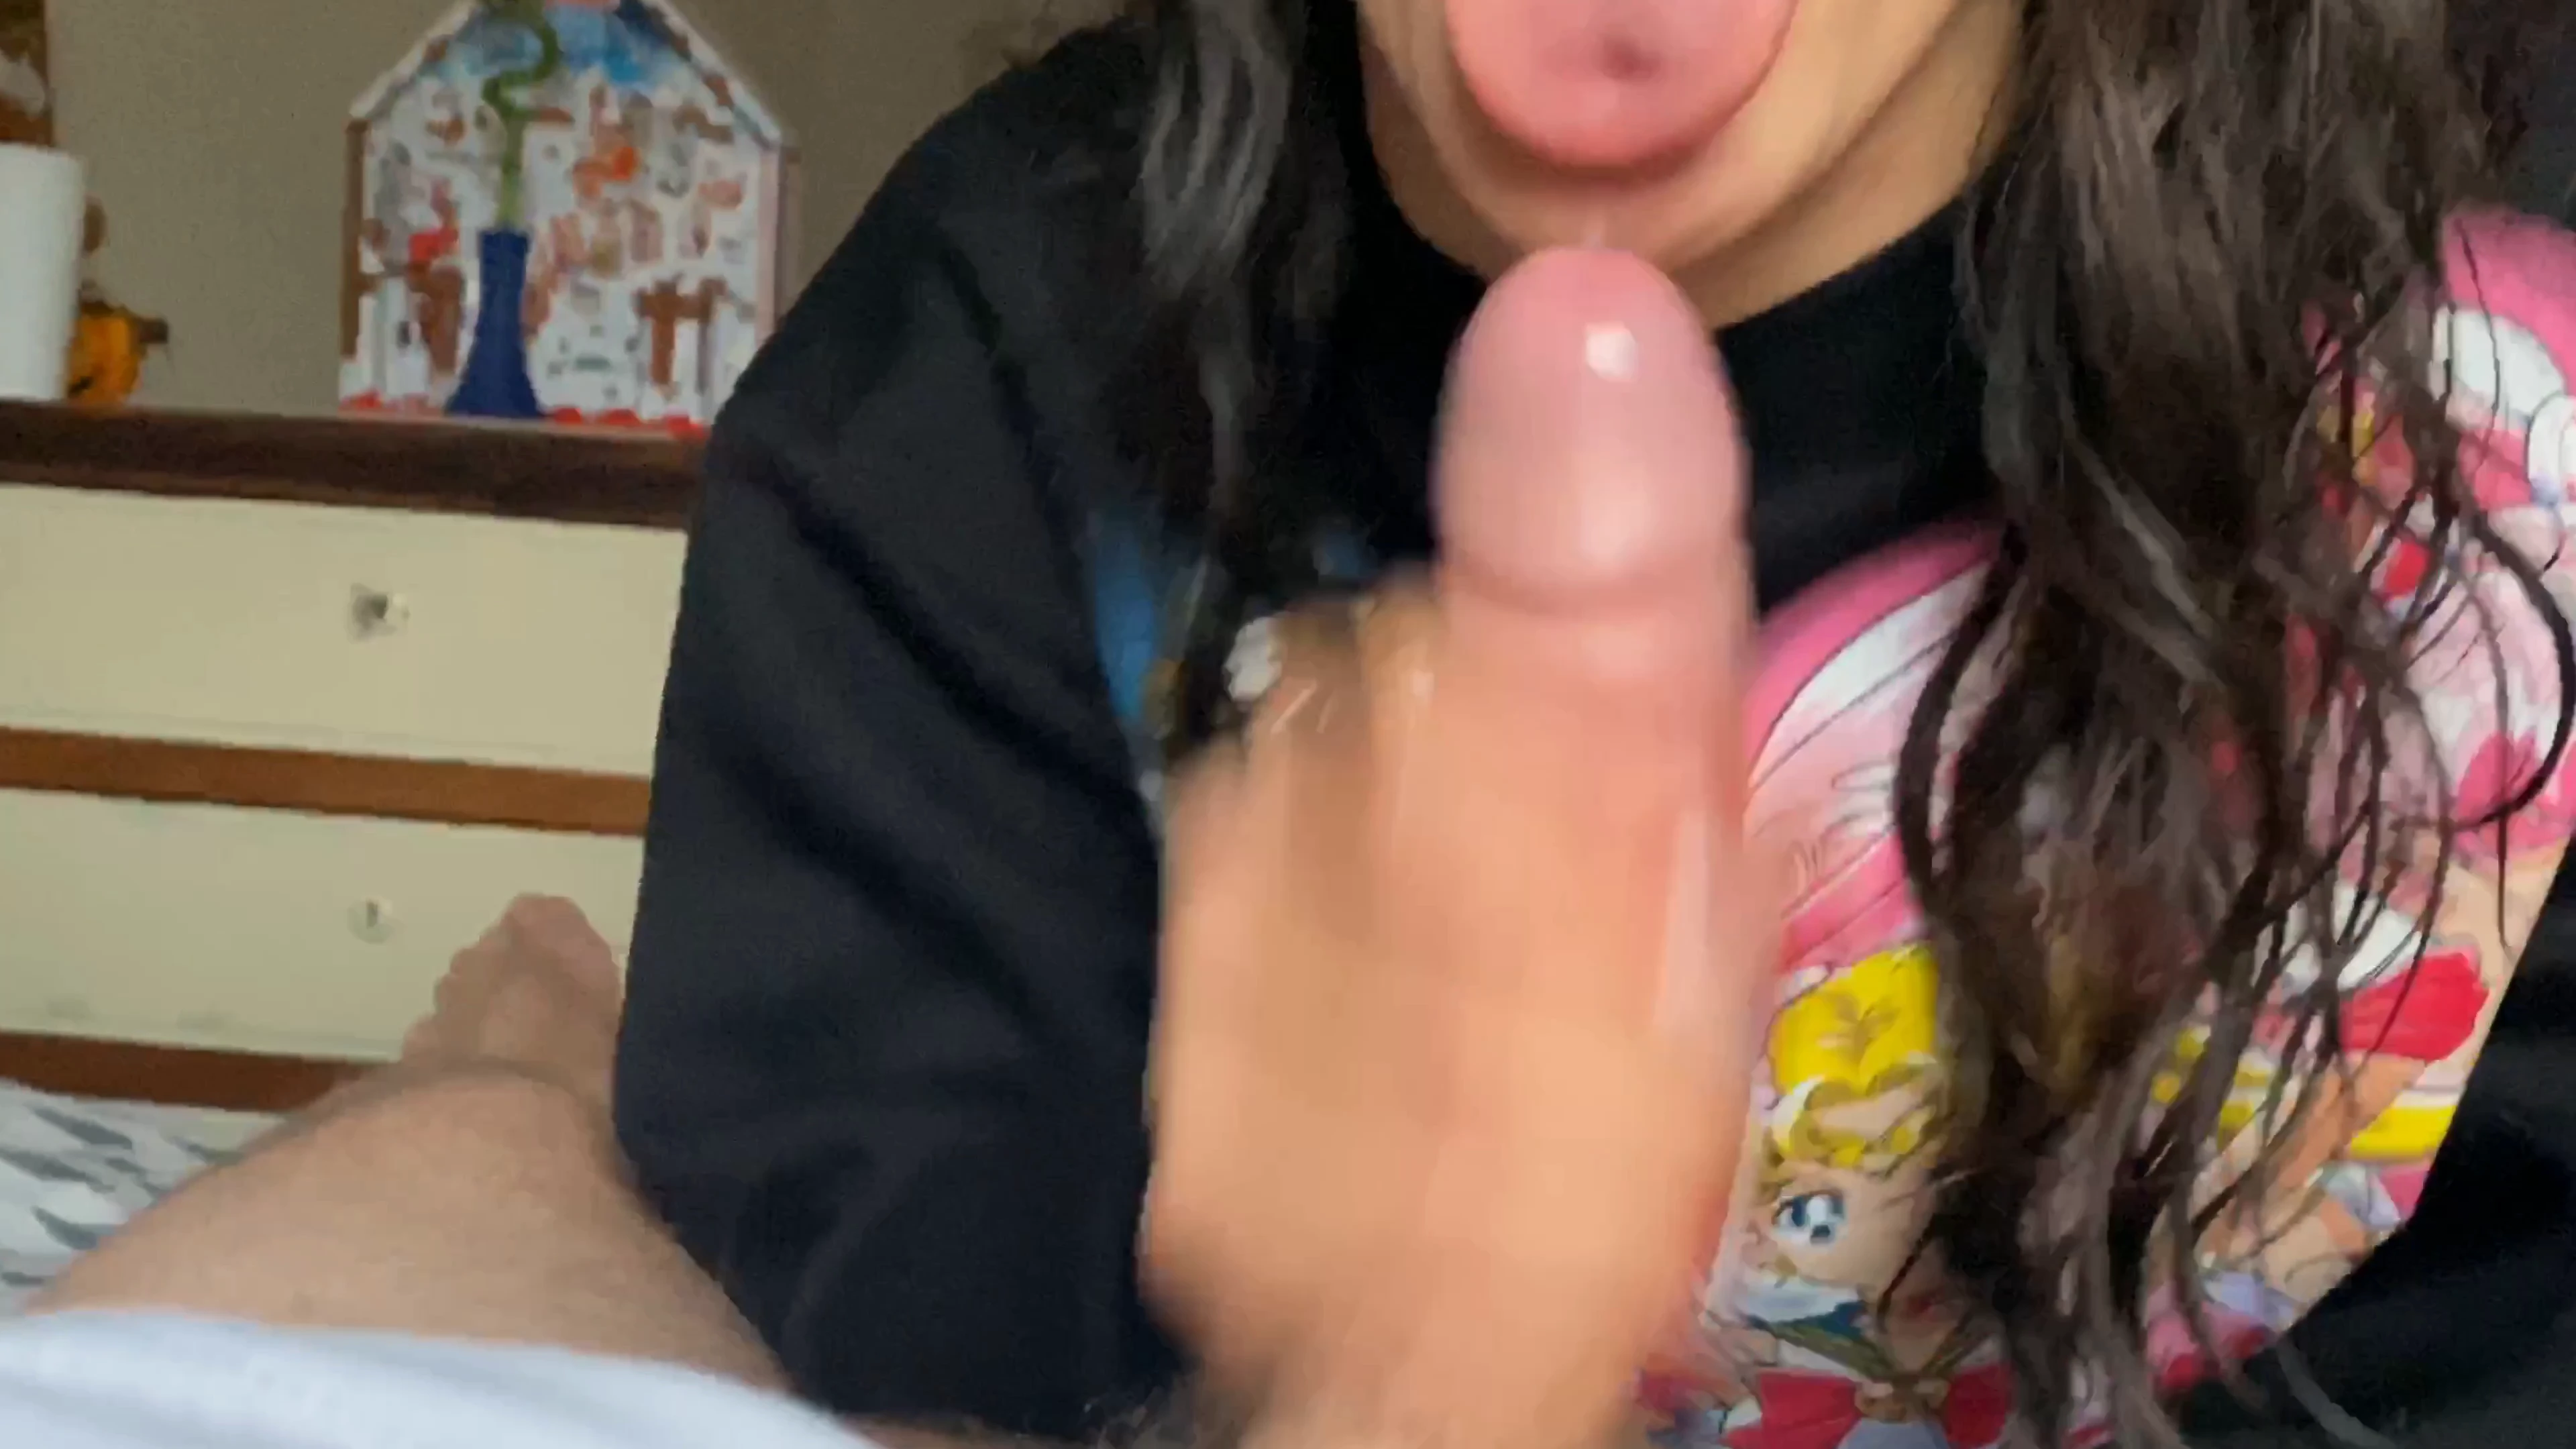 First post here, my best friend had a bad day so I let him cum in my mouth 😈❤️